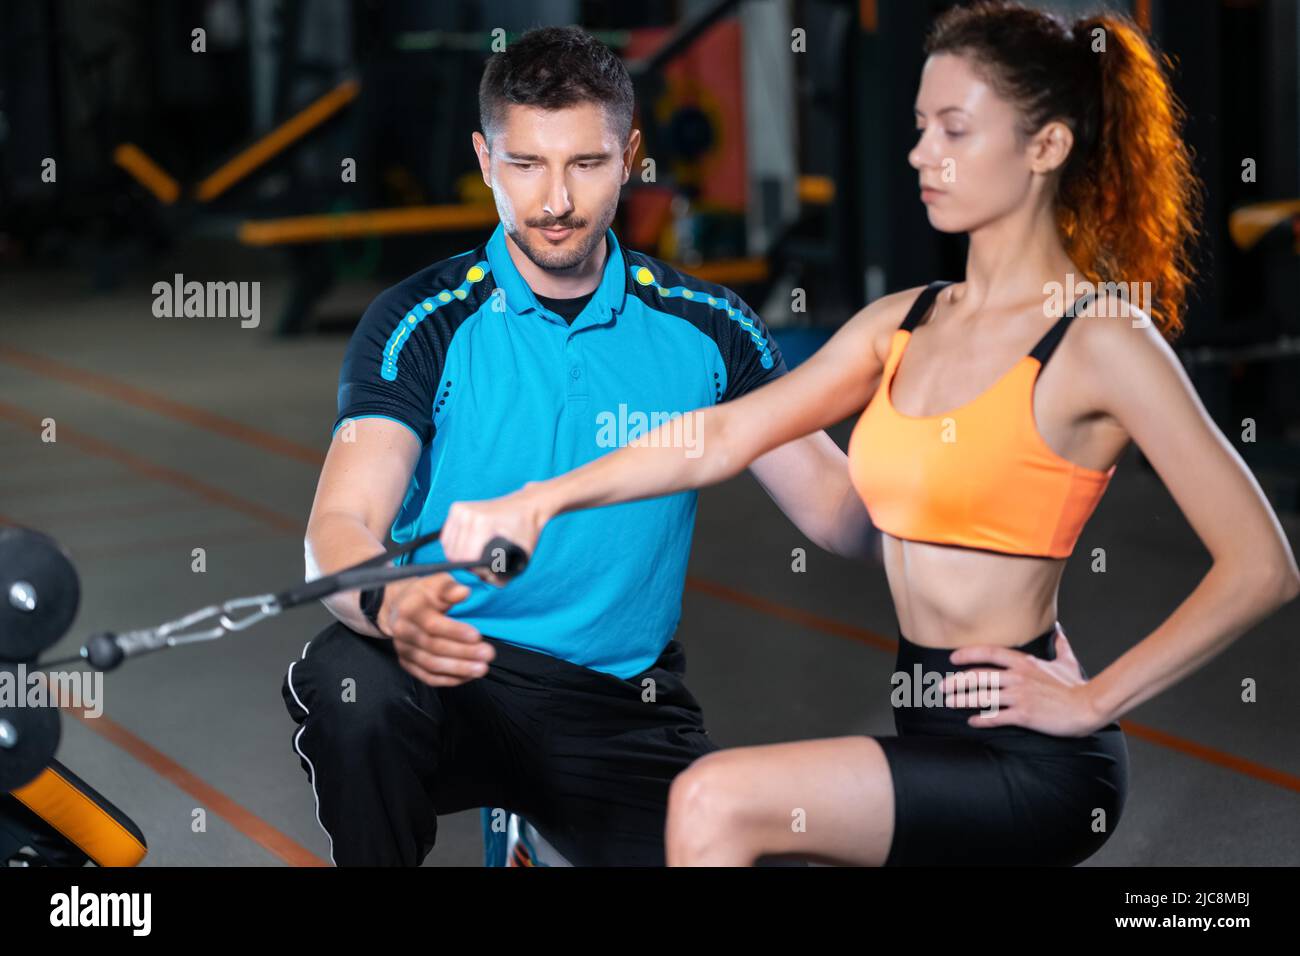 young woman exercising single arm row kneeling with personal trainer man in gym Stock Photo